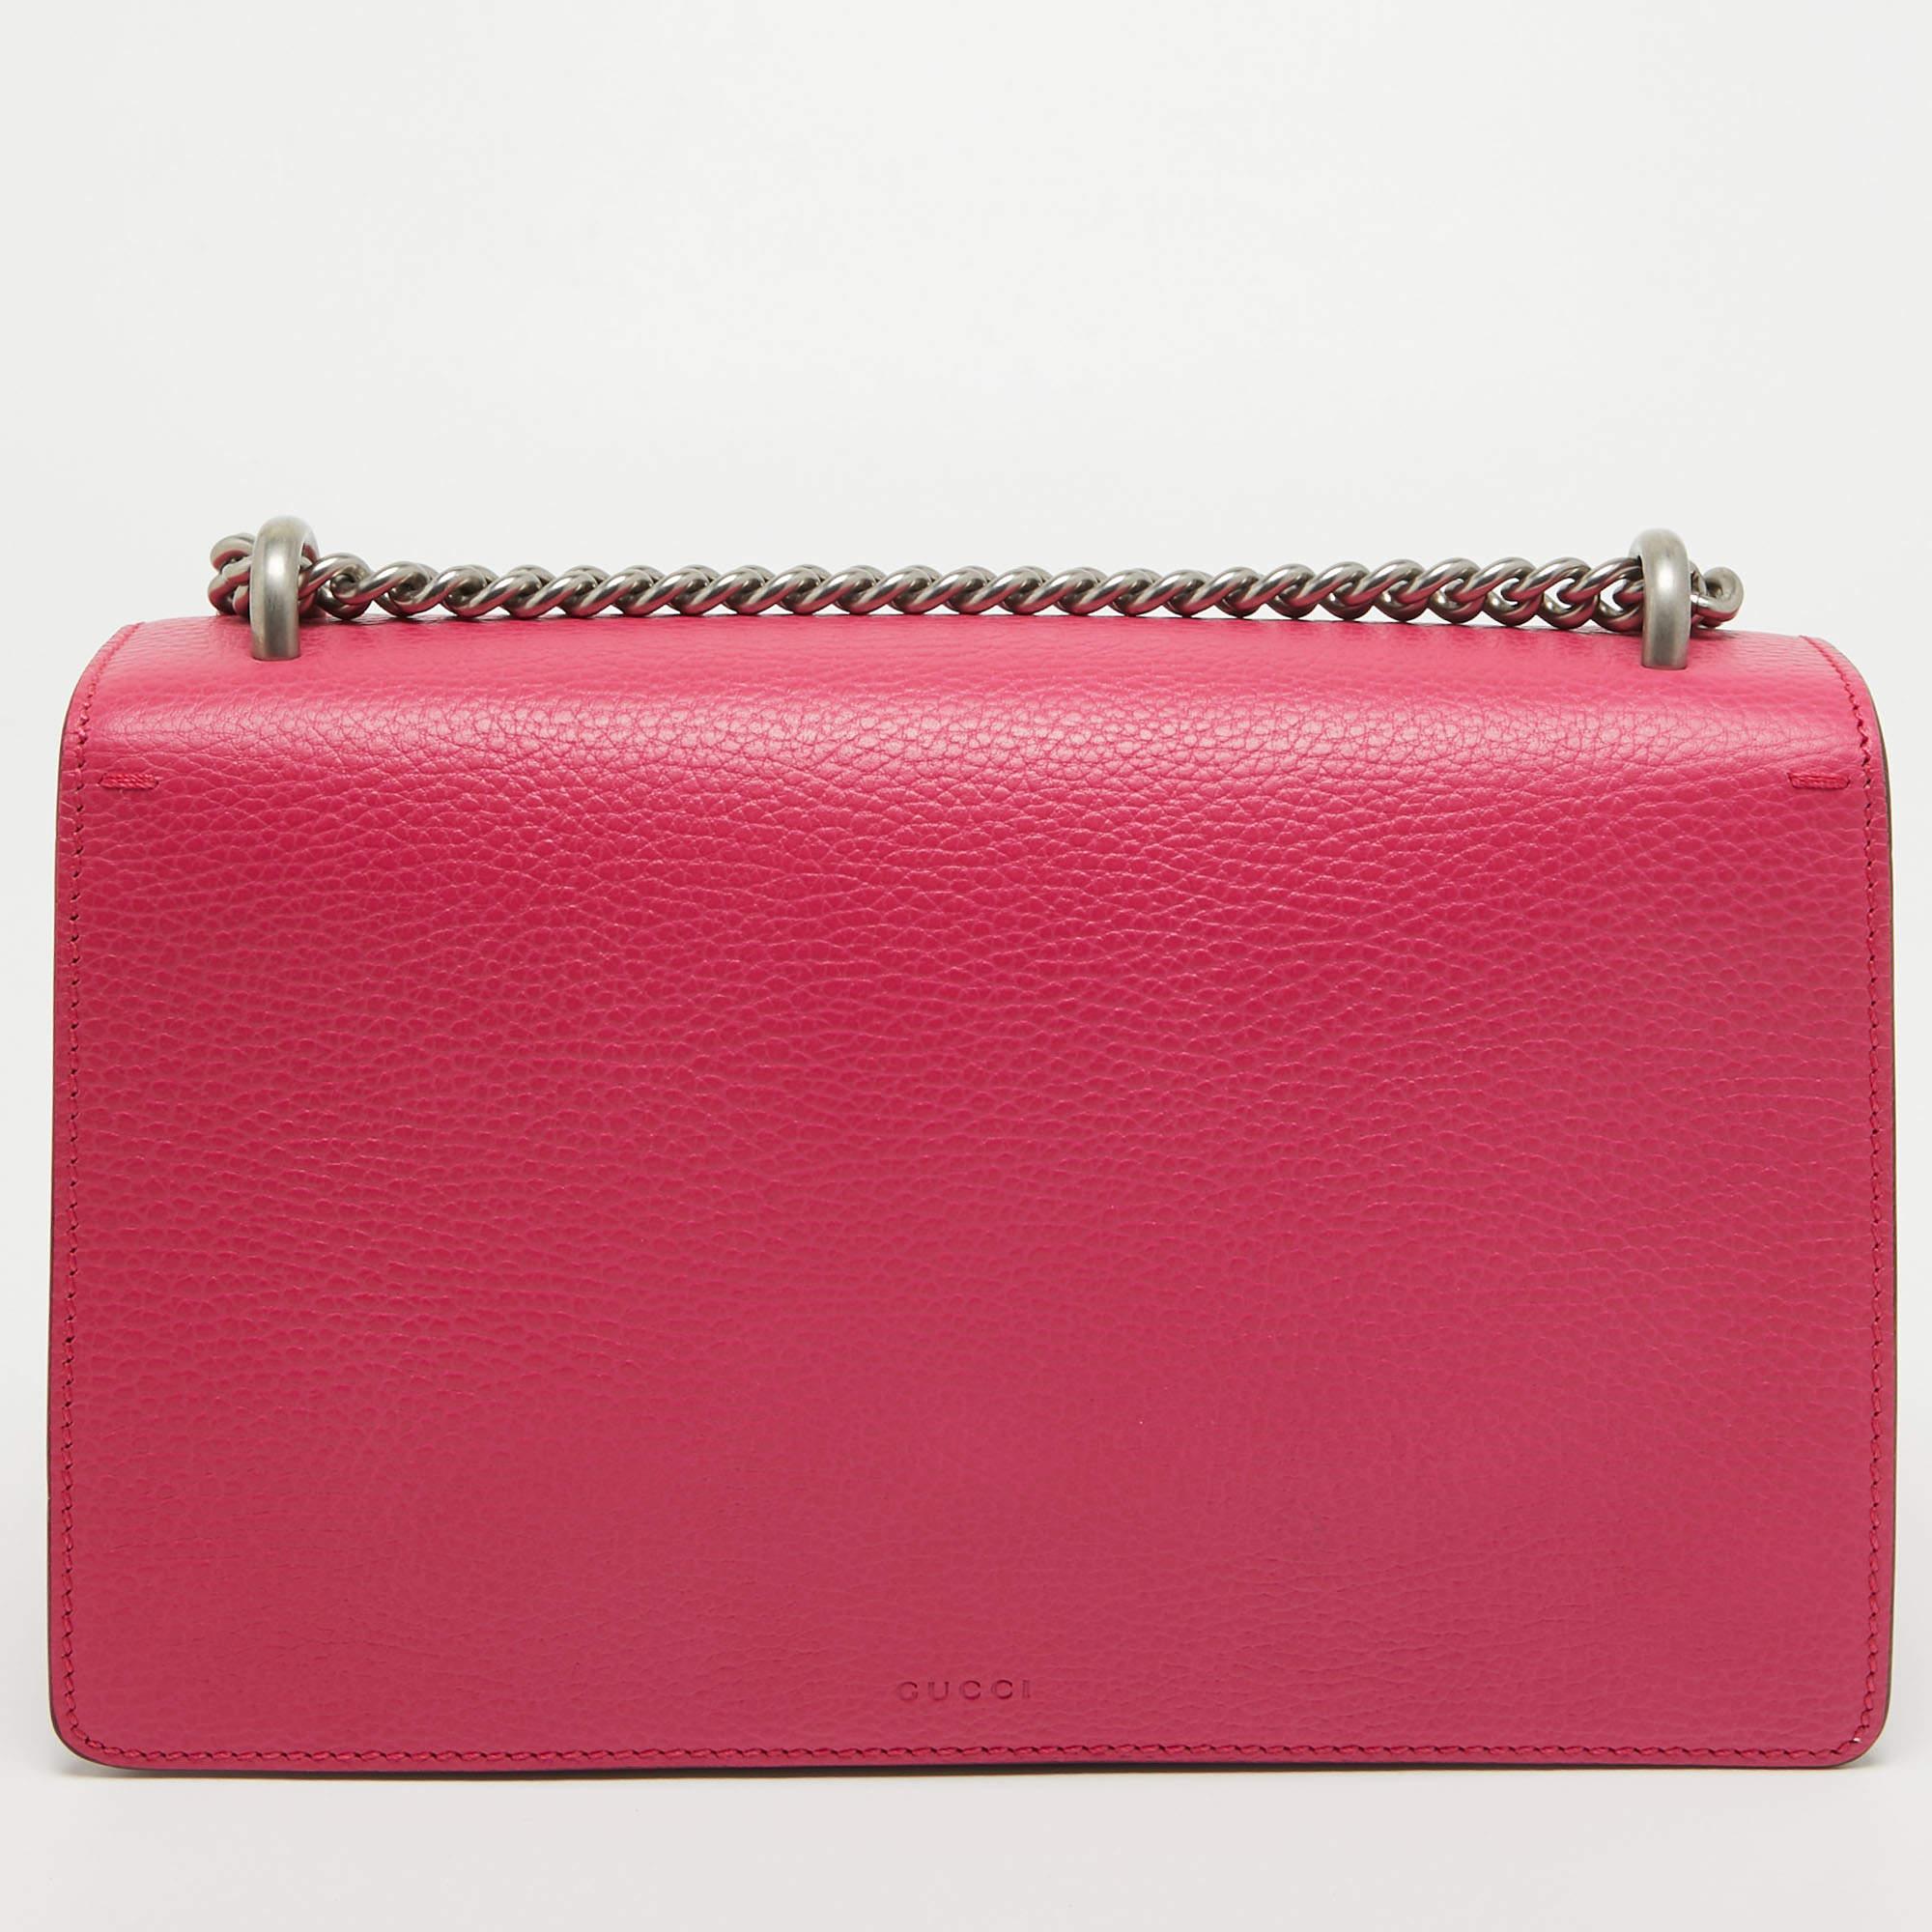 Gucci Magenta Leather Small Guccify Pearl Embellished Dionysus Shoulder Bag In Excellent Condition For Sale In Dubai, Al Qouz 2